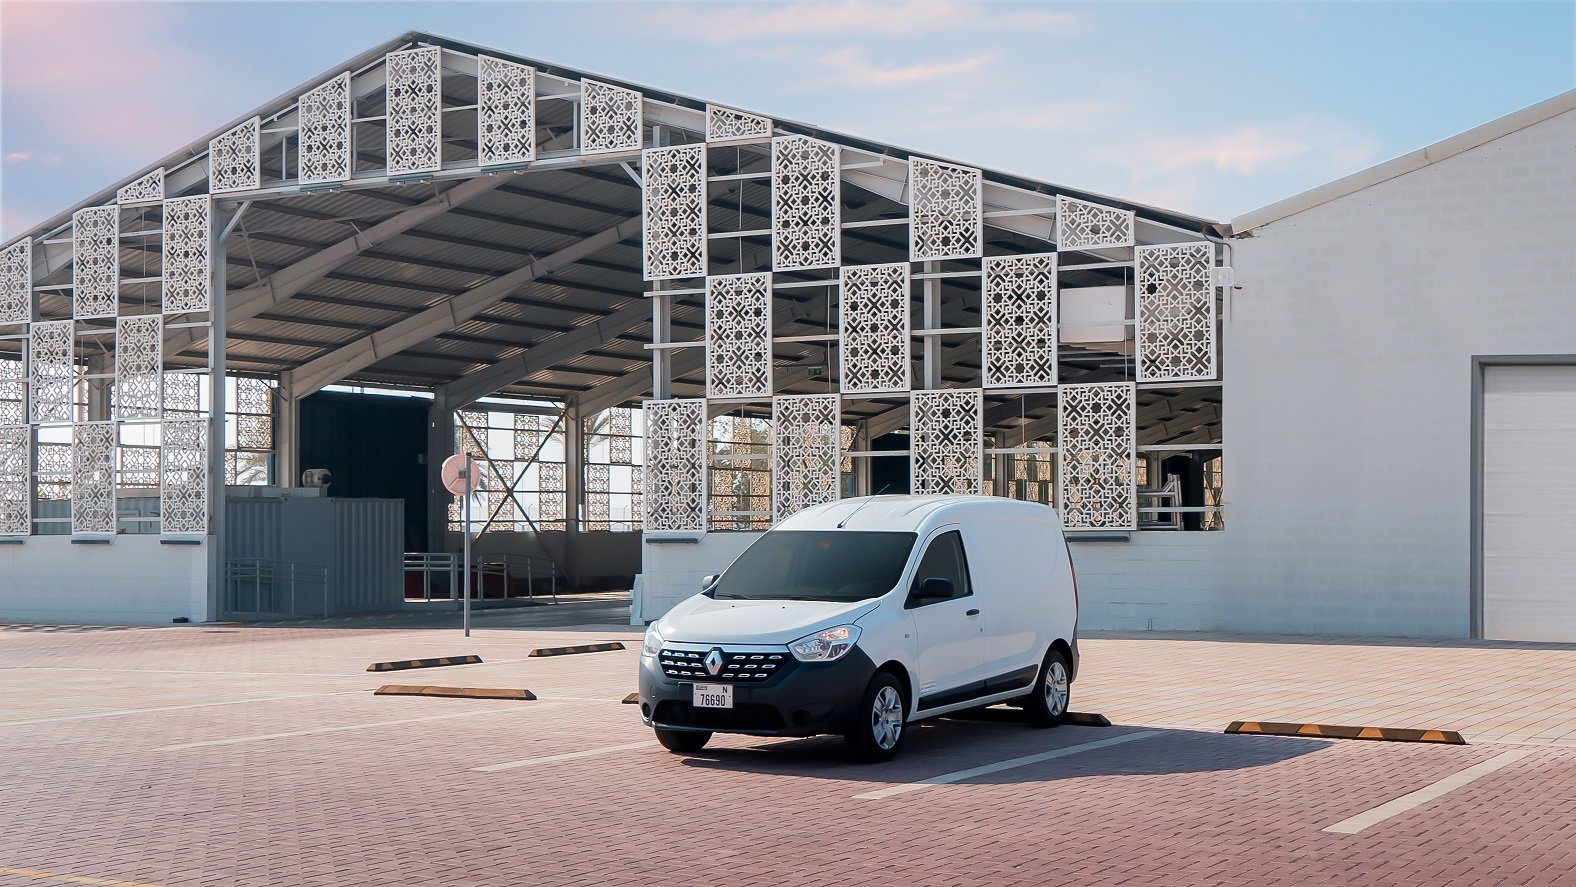 Meet the Renault Dokker - a model of utility and style